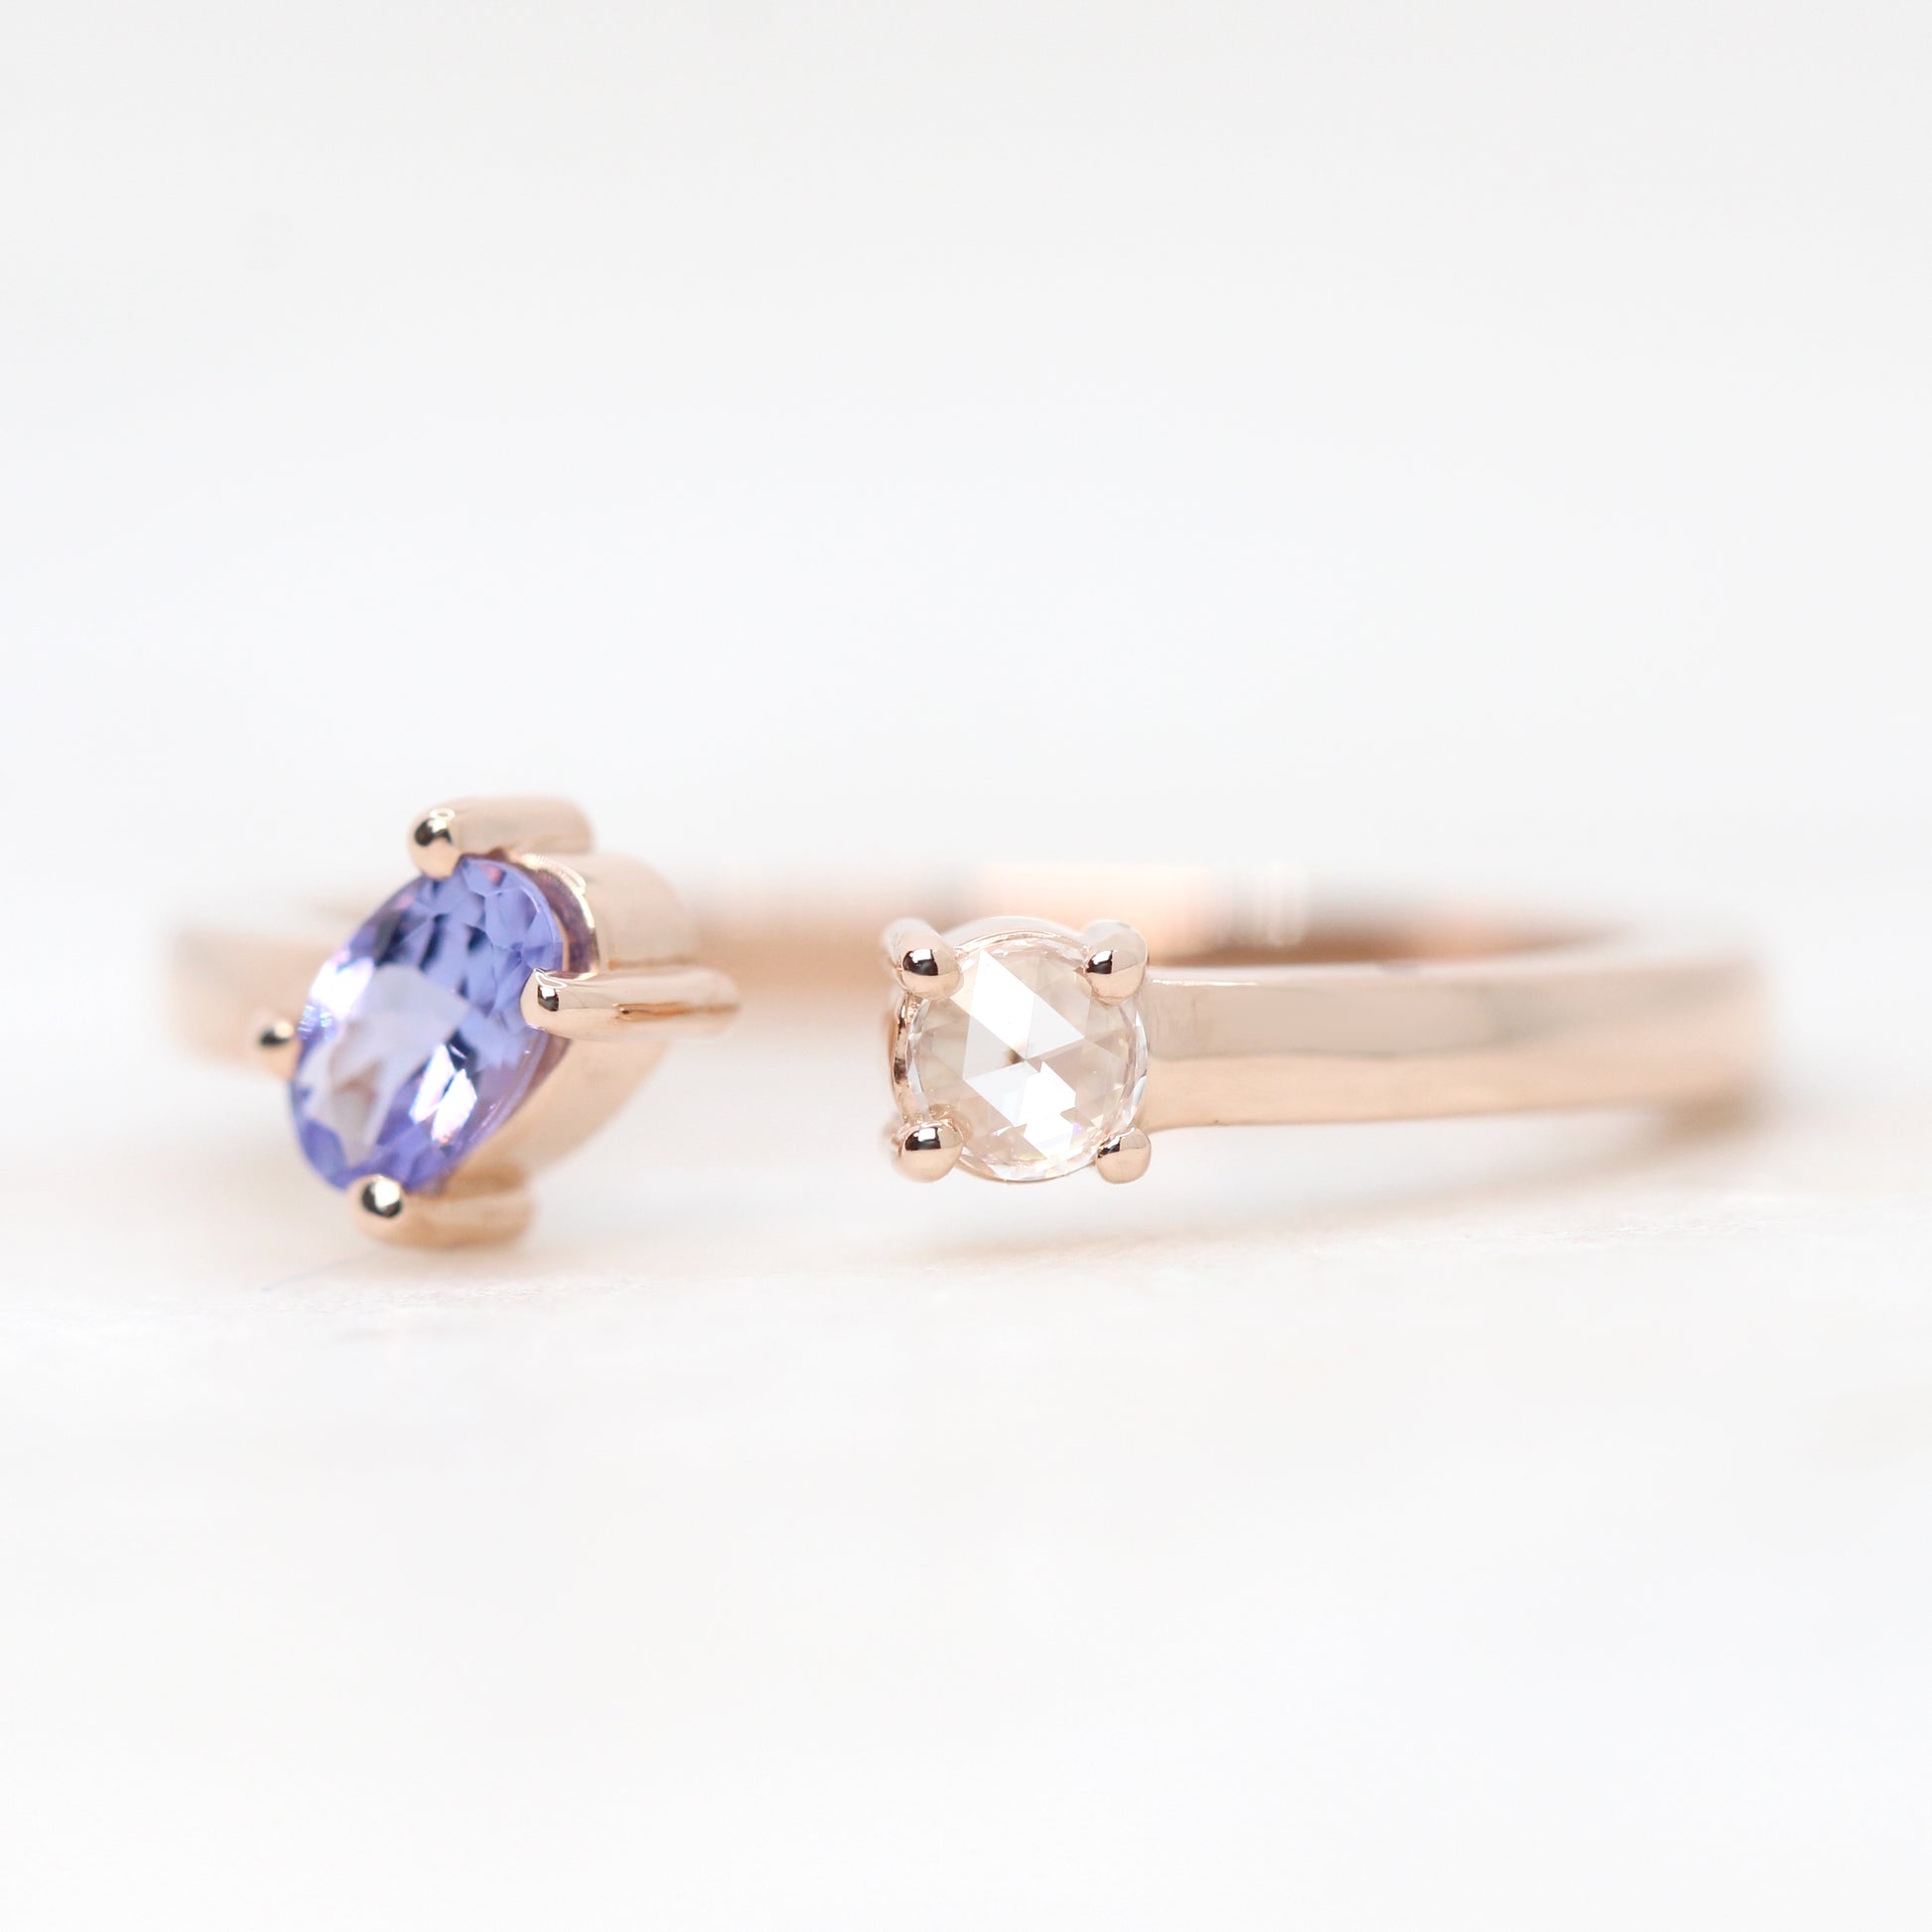 (SB) Jamie Ring with an Oval Tanzanite & Clear Round Diamond - Made to Order, Choose Your Gold Tone - Midwinter Co. Alternative Bridal Rings and Modern Fine Jewelry